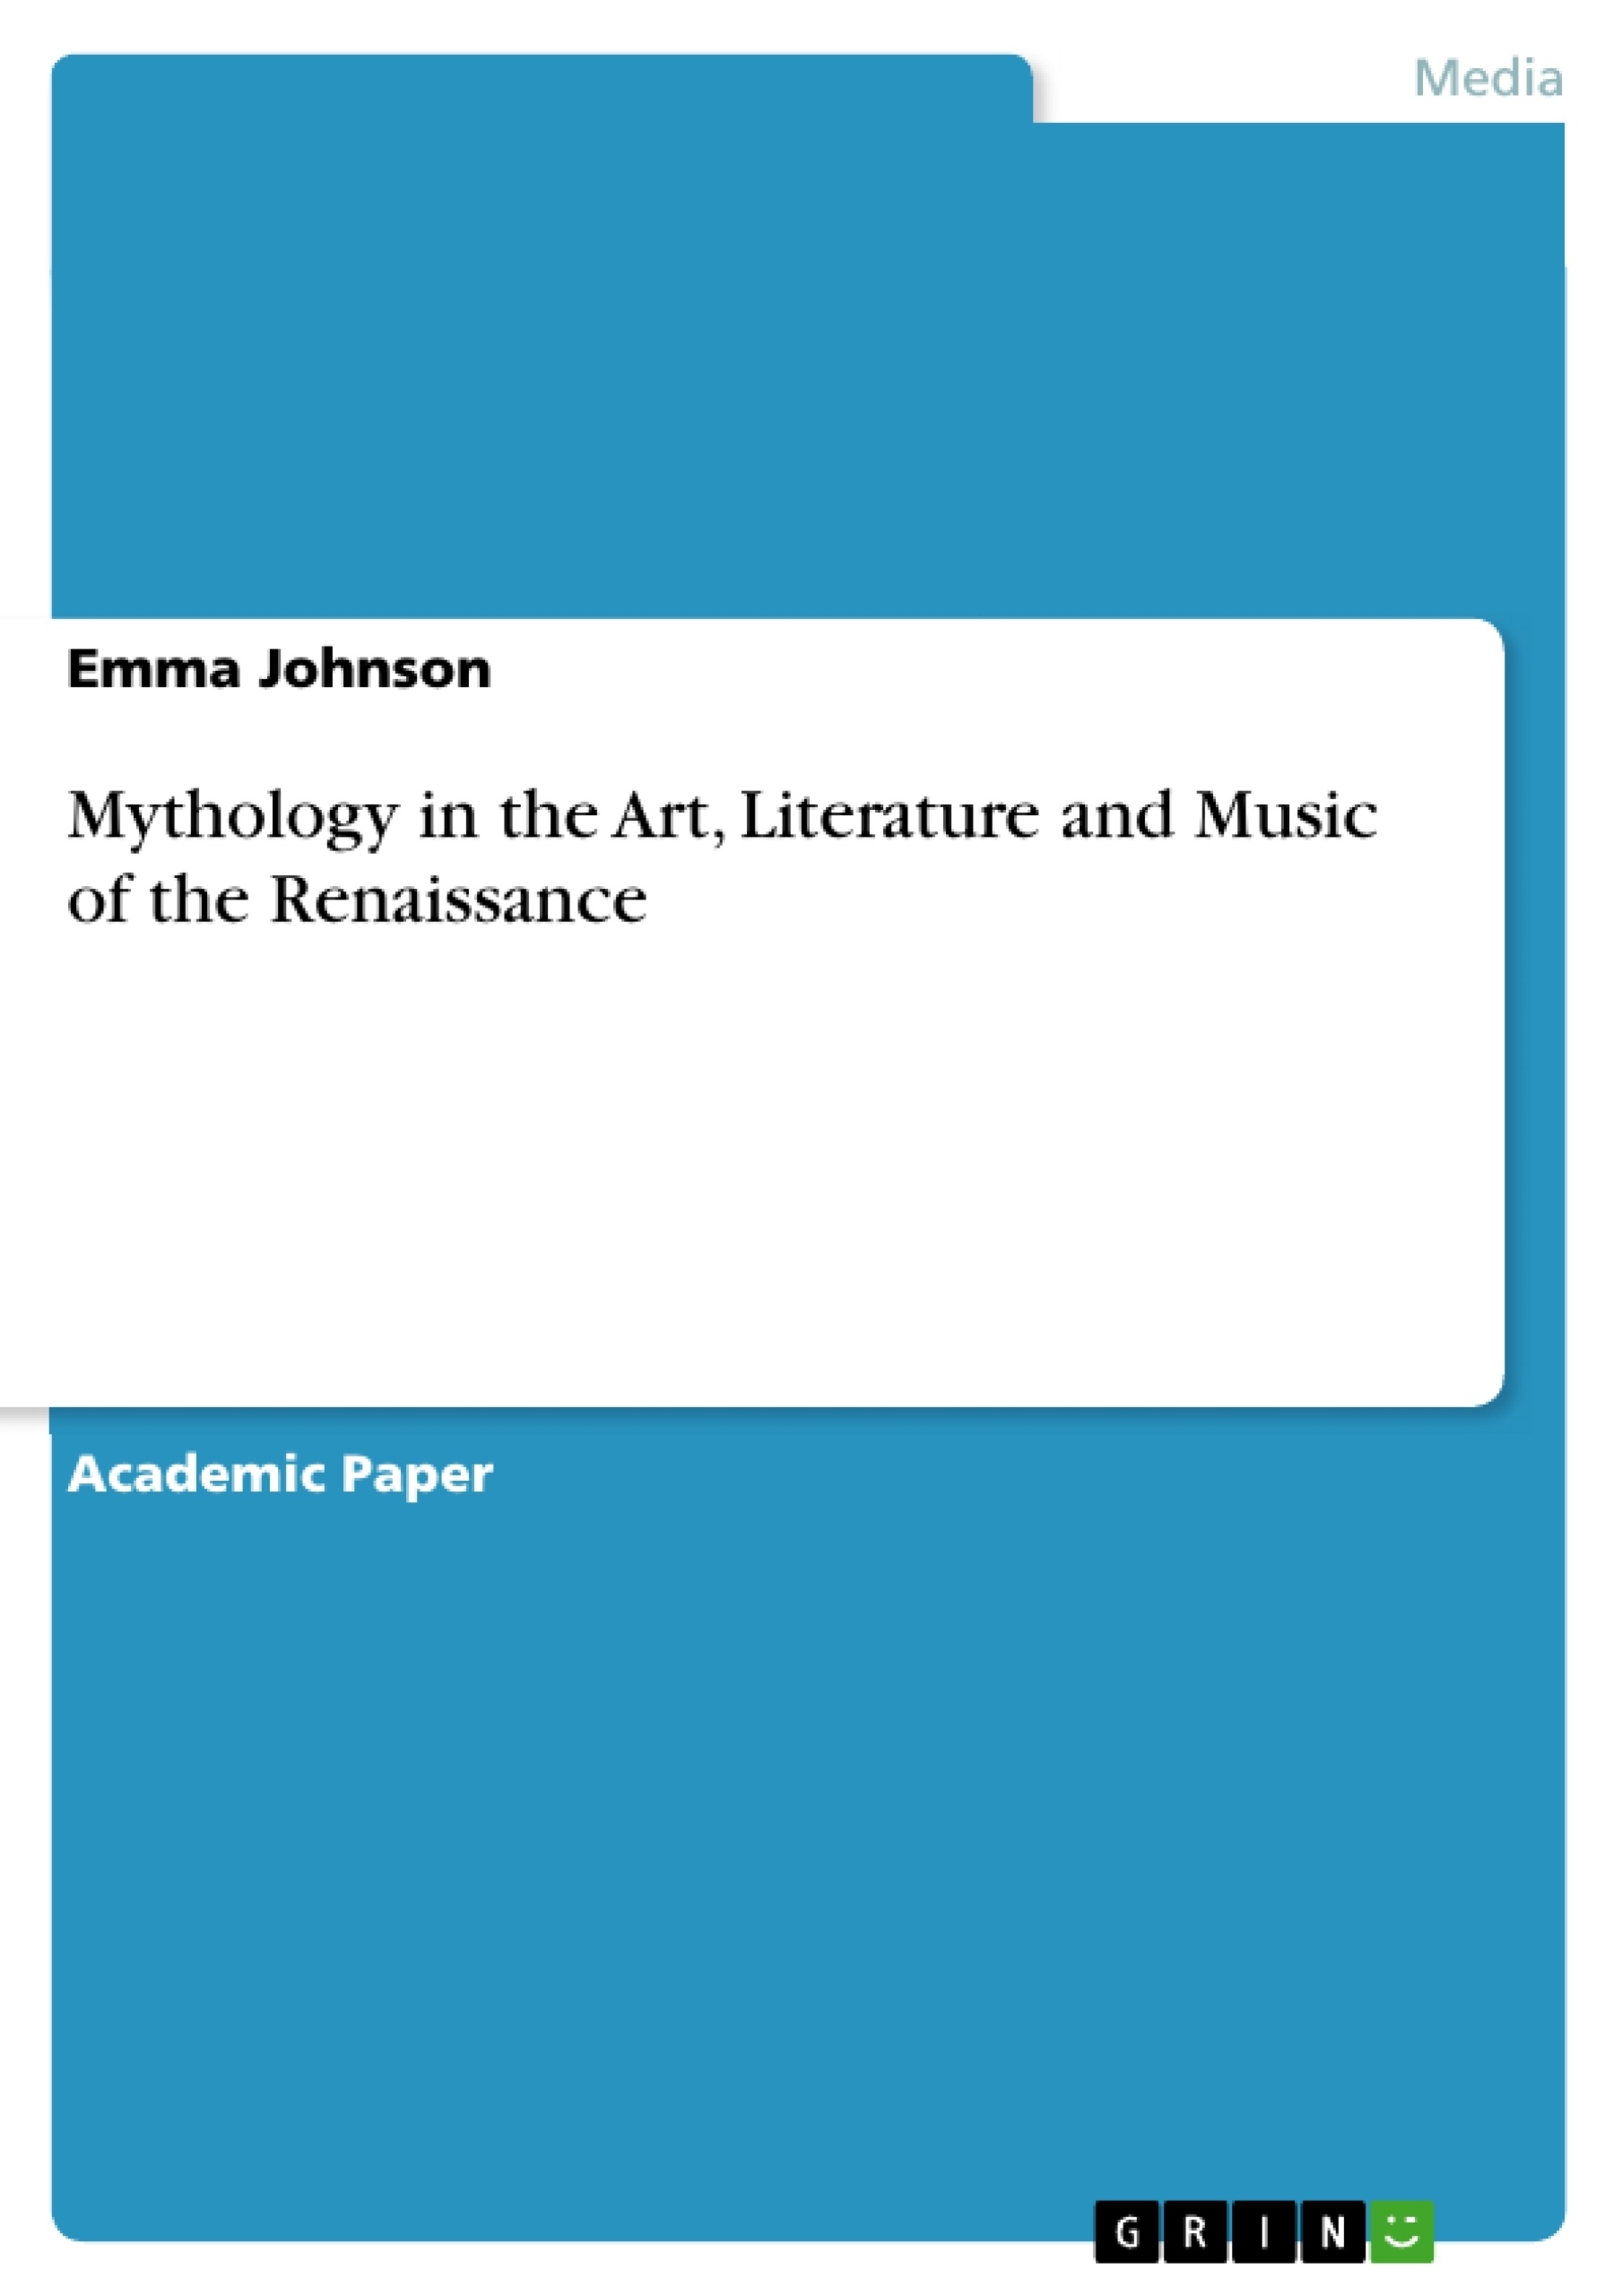 Title: Mythology in the Art, Literature and Music of the Renaissance